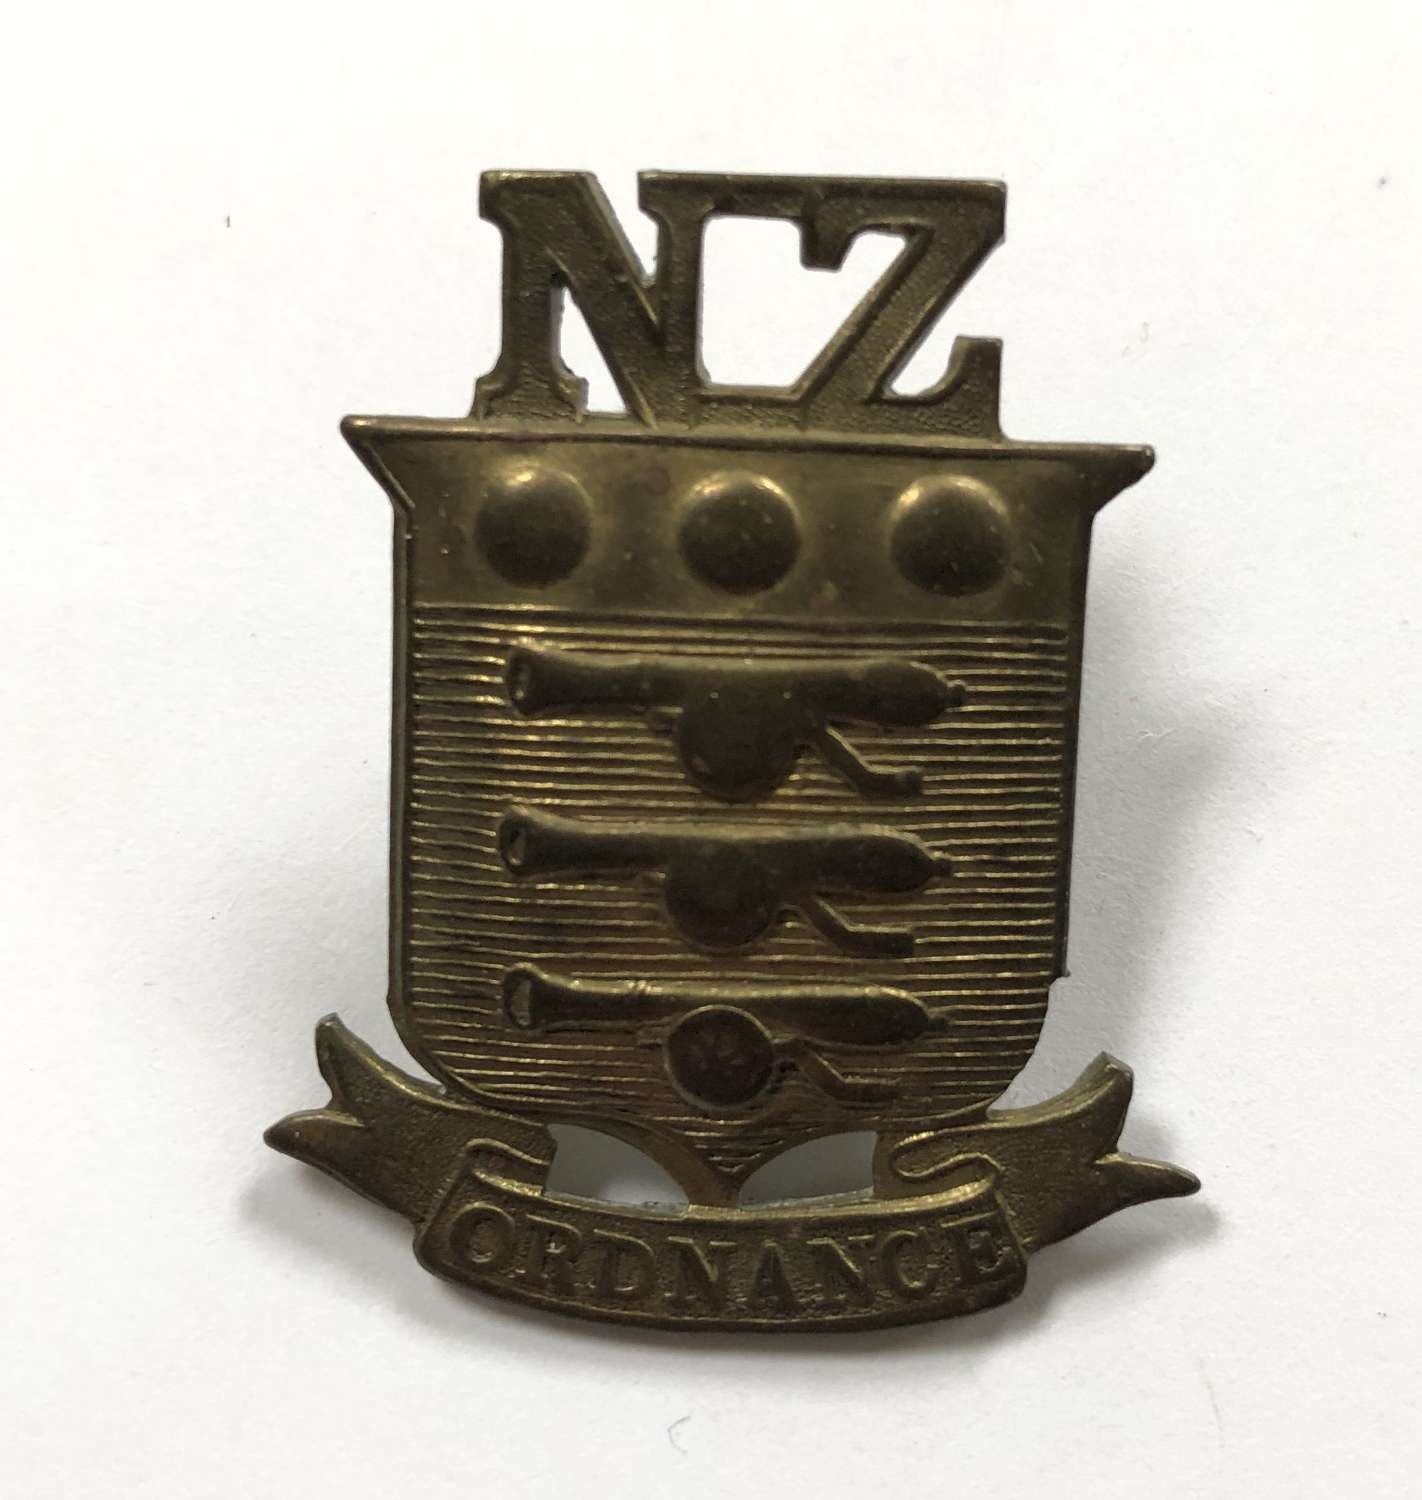 New Zealand Army Ordnance Corps WWI cap badge